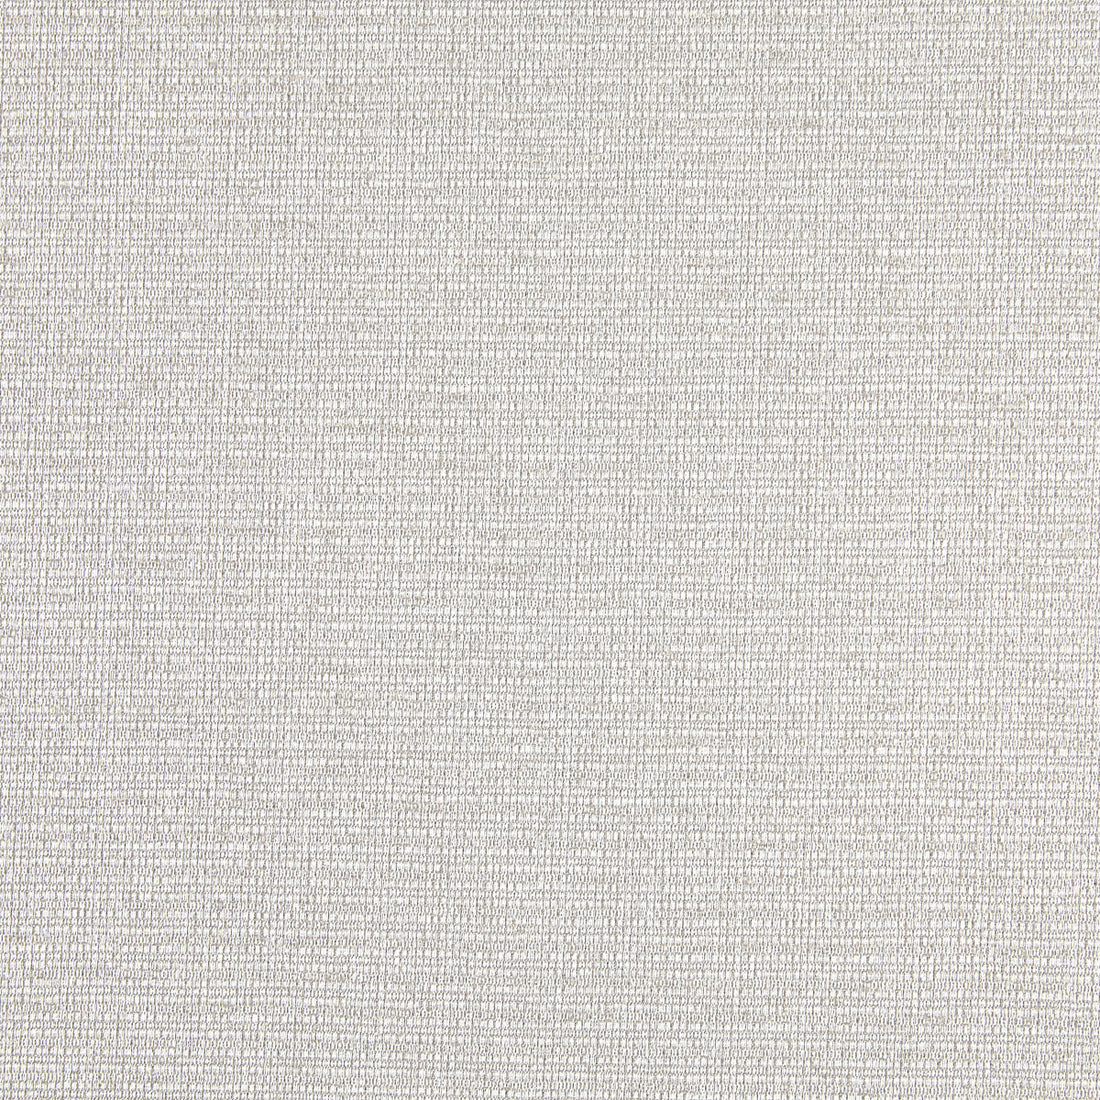 Shelley fabric in 7 color - pattern LZ-30365.07.0 - by Kravet Design in the Lizzo collection